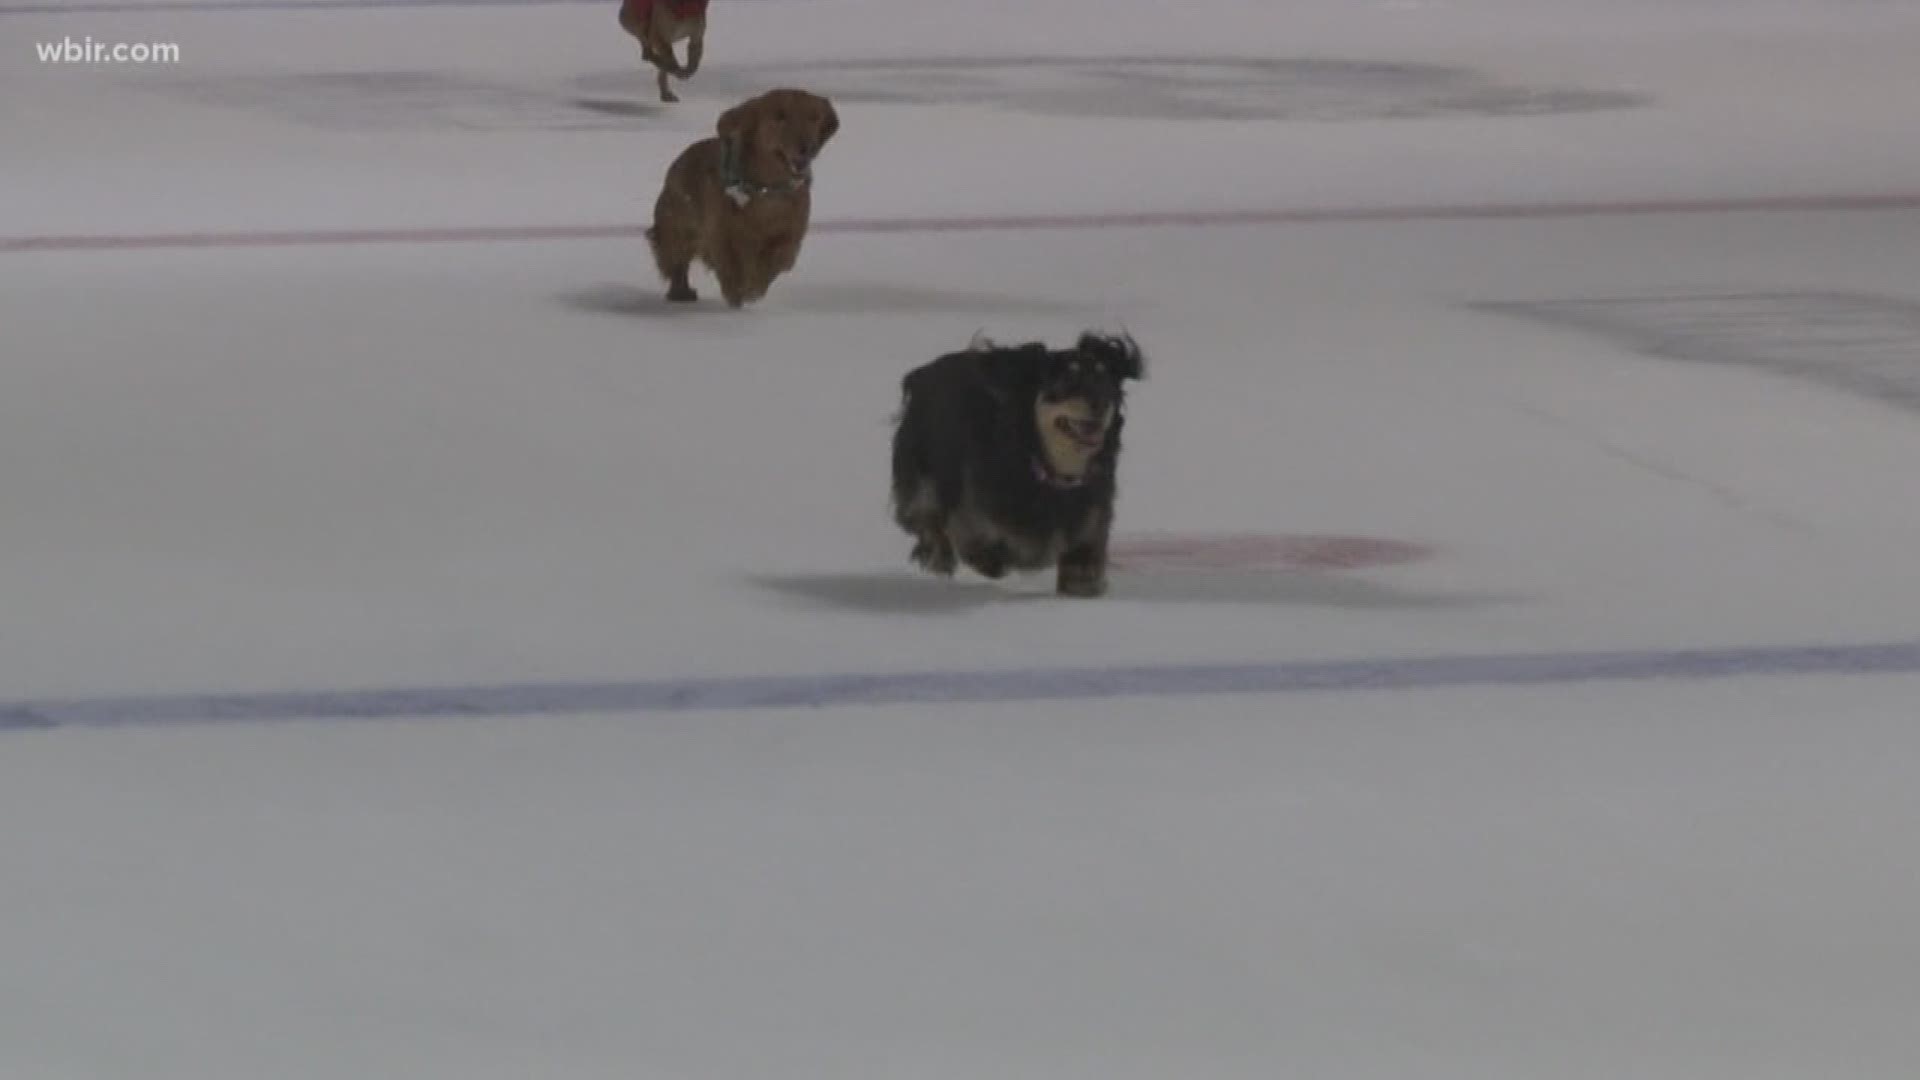 Legions of wiener dogs tested their speed on the ice.